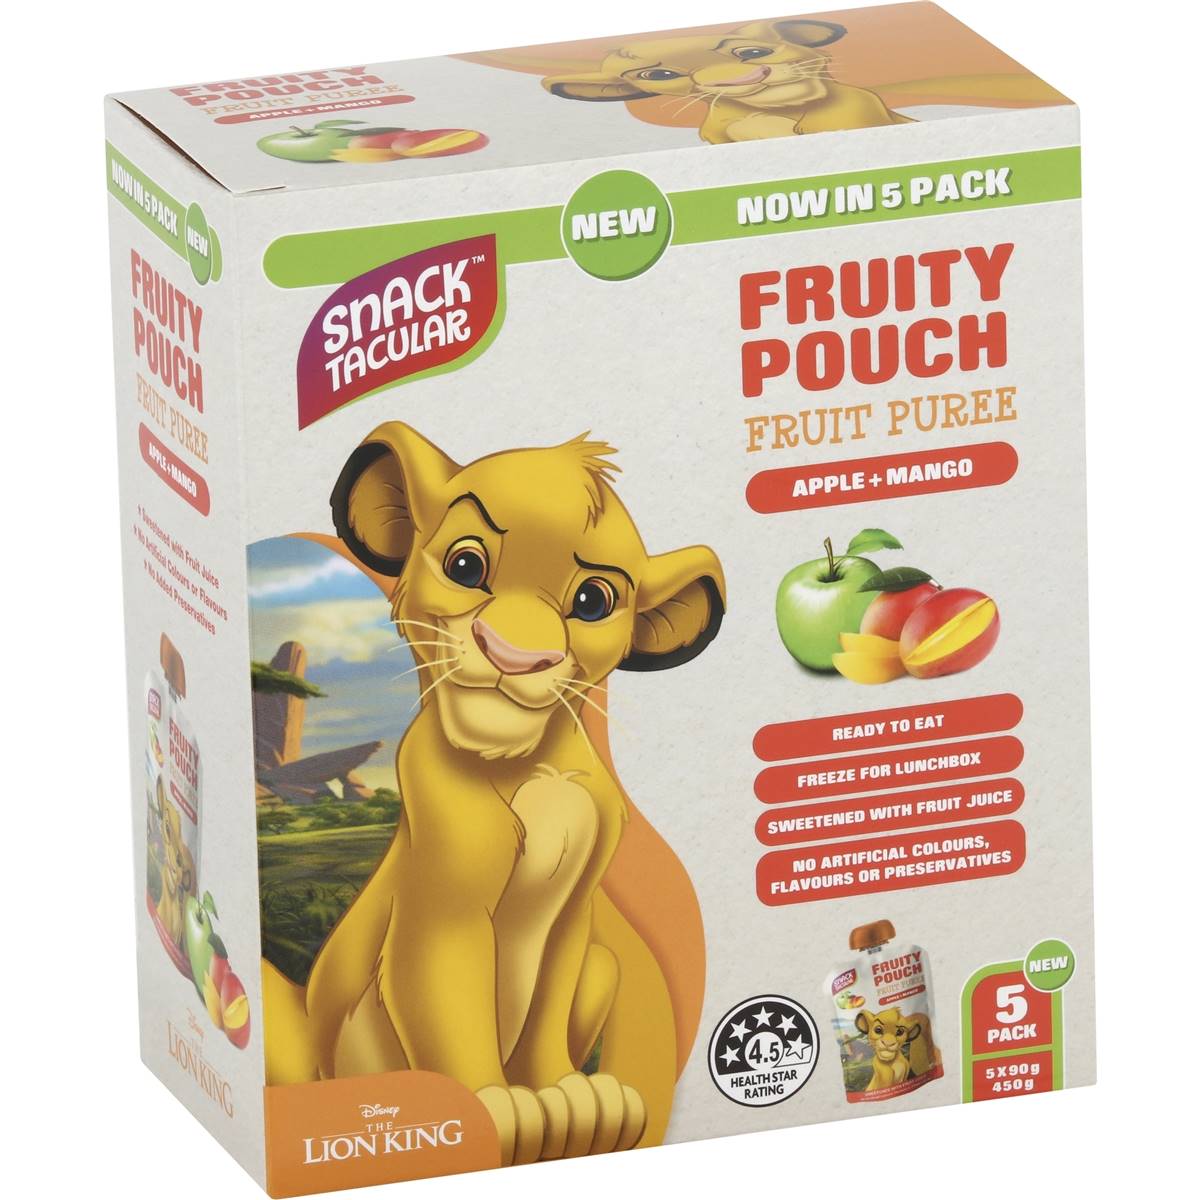 Calories in Snacktacular Fruit Pouch Apple & Mango Puree